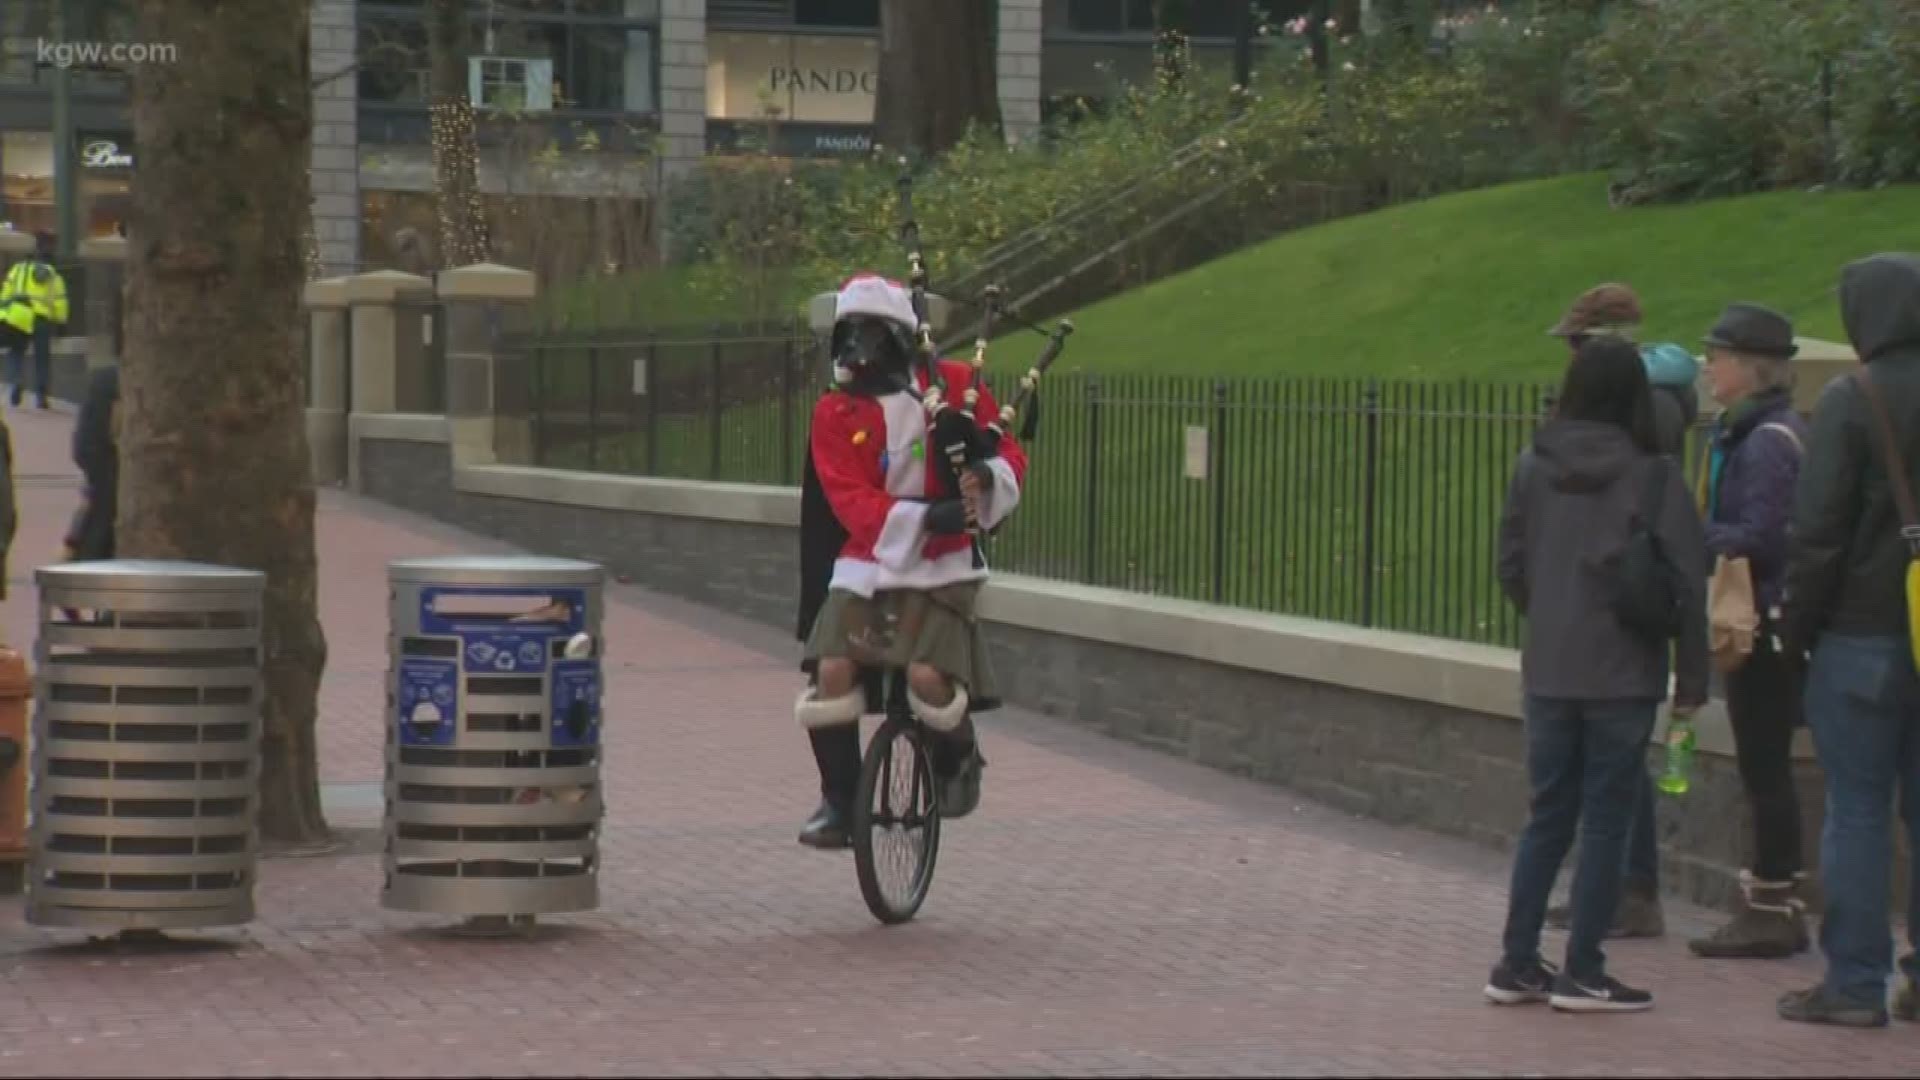 The Unipiper started a nonprofit to raise awareness and highlight Portland’s weirdness.